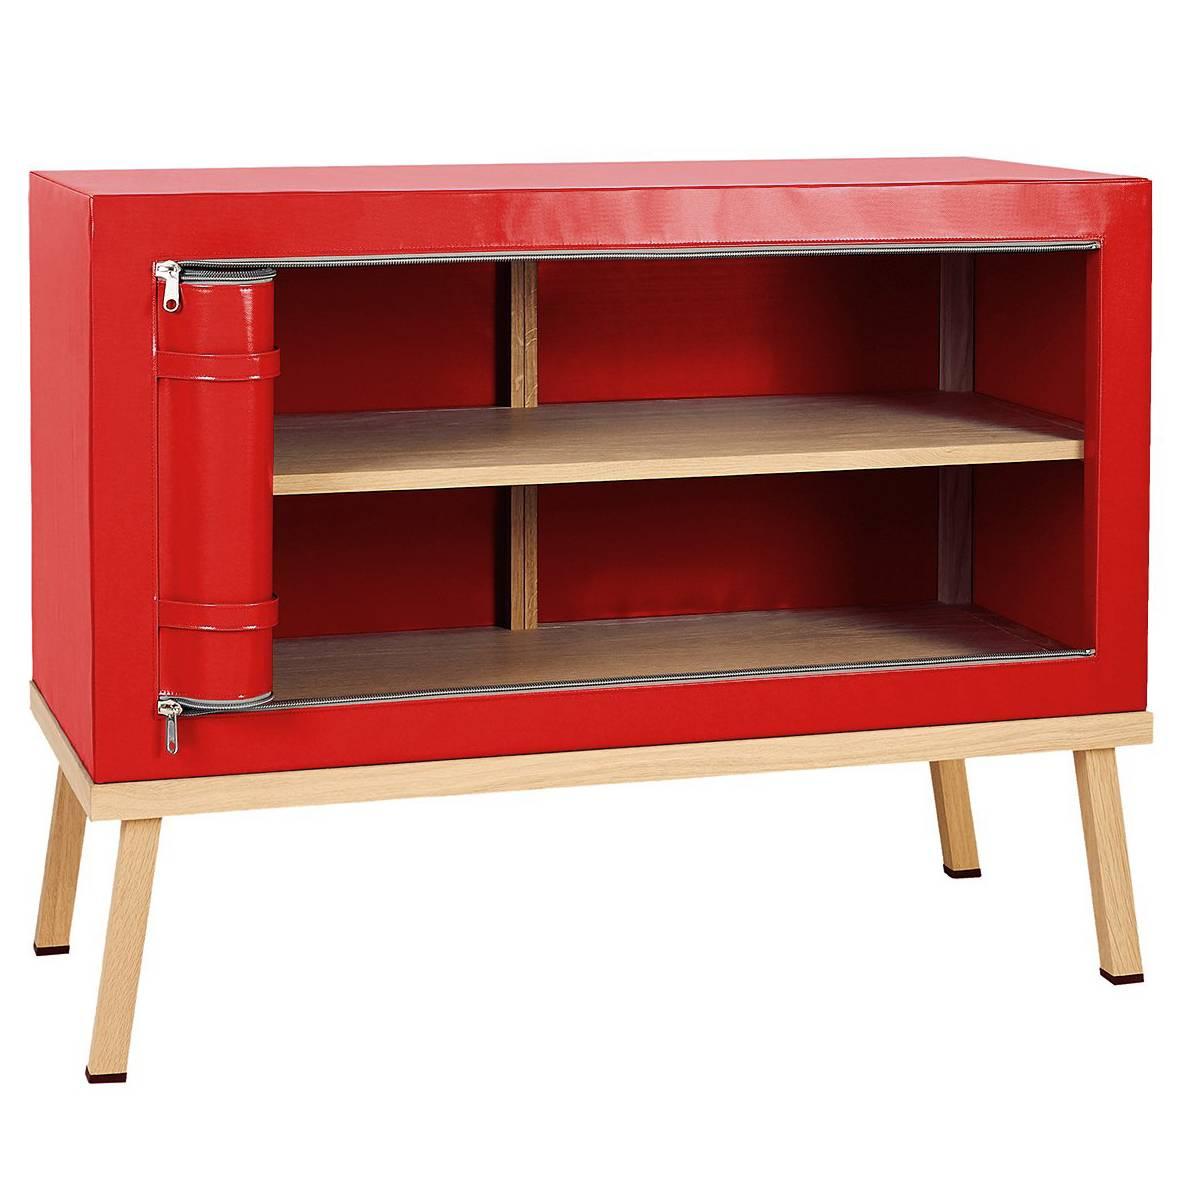 Visser and Meijwaard Truecolors Dresser or Credenza in Red PVC Cloth  For Sale